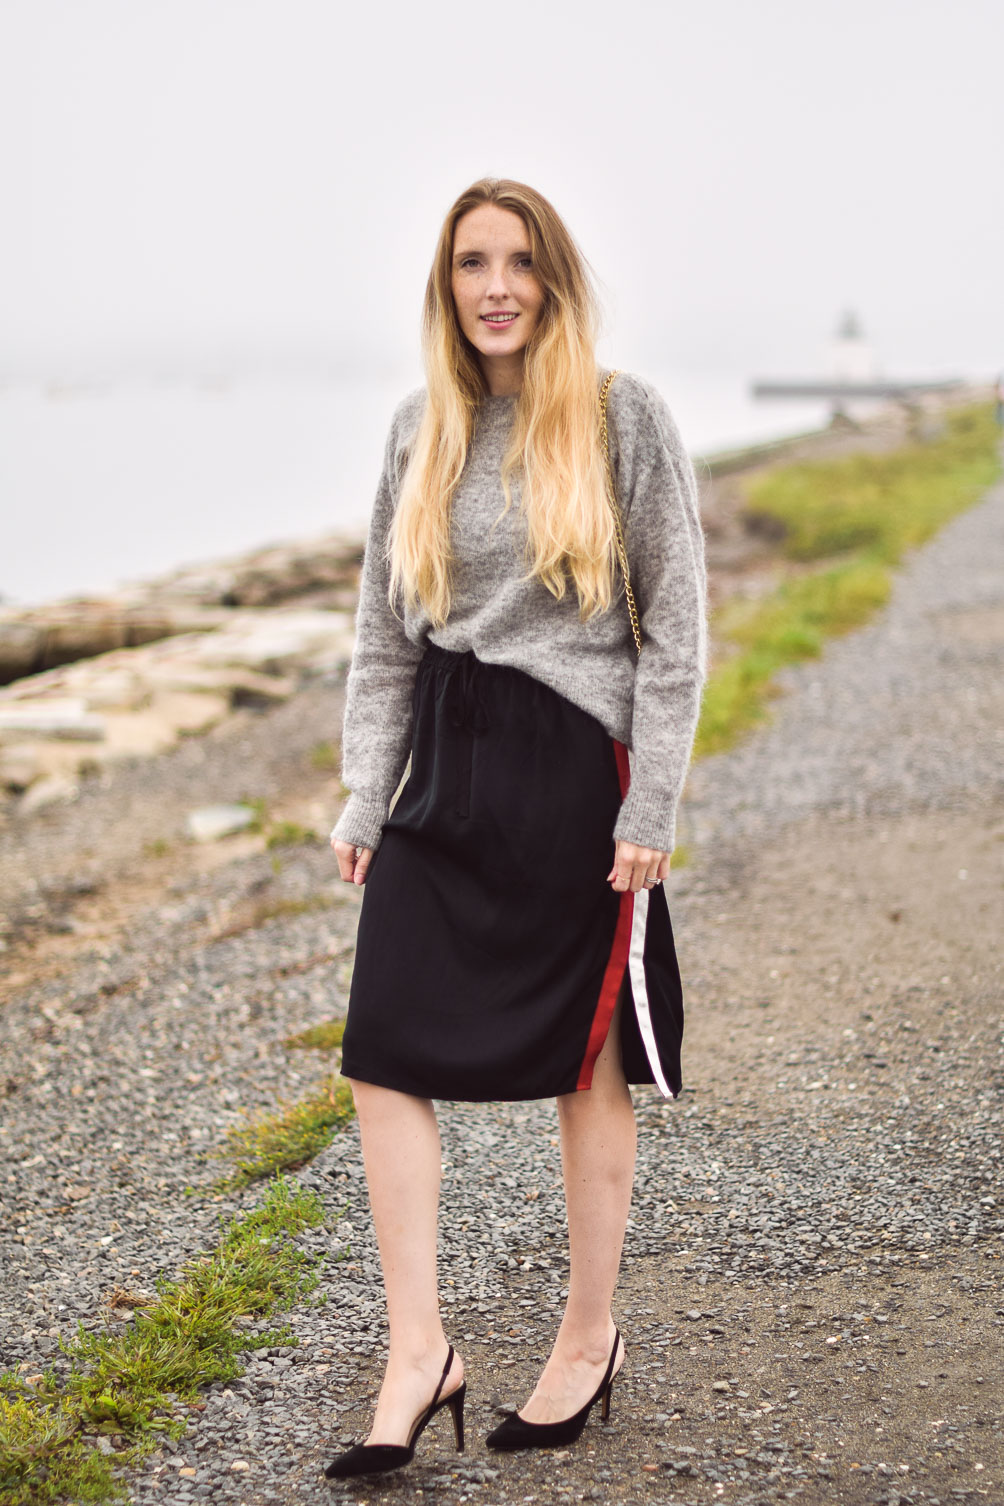 styling a mohair sweater with silky track skirt and black slingback pumps for fall outfit inspiration